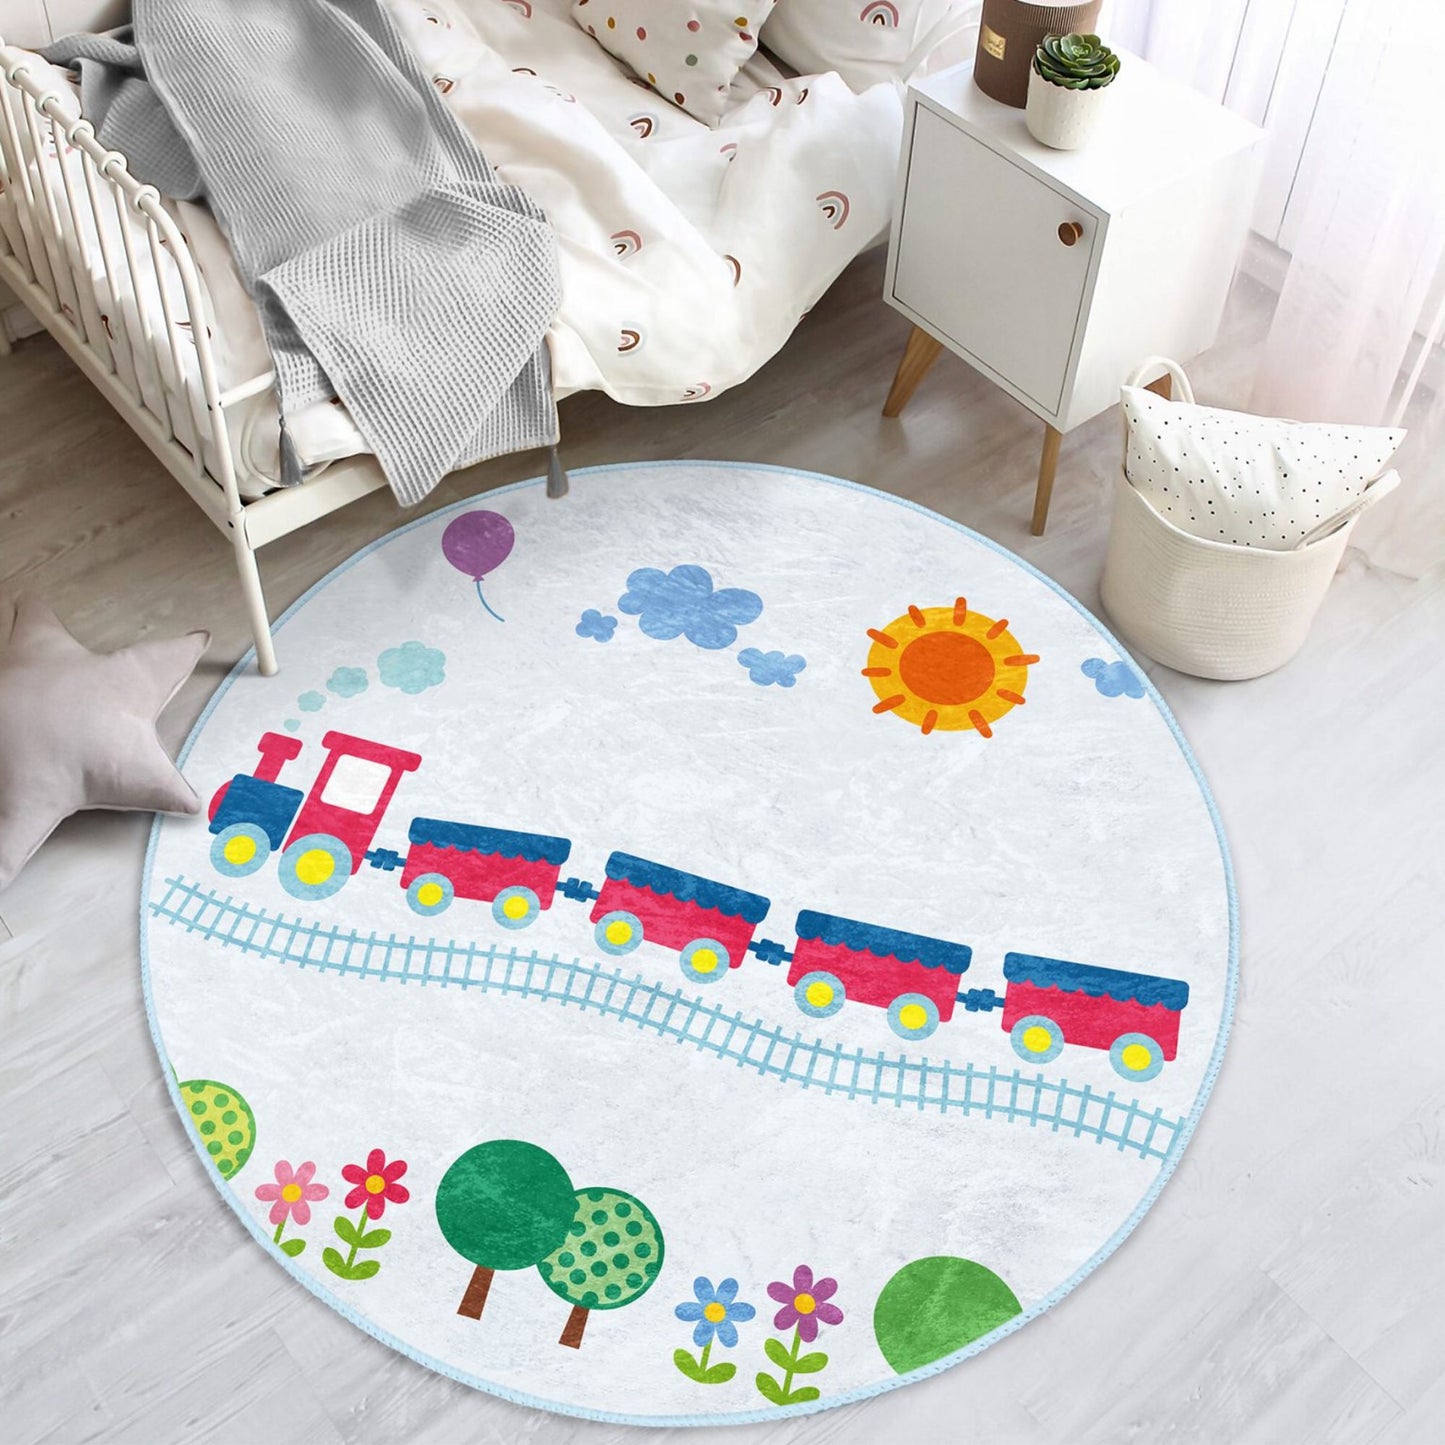 Soft & Durable Homeezone Rug - Ideal for Playrooms